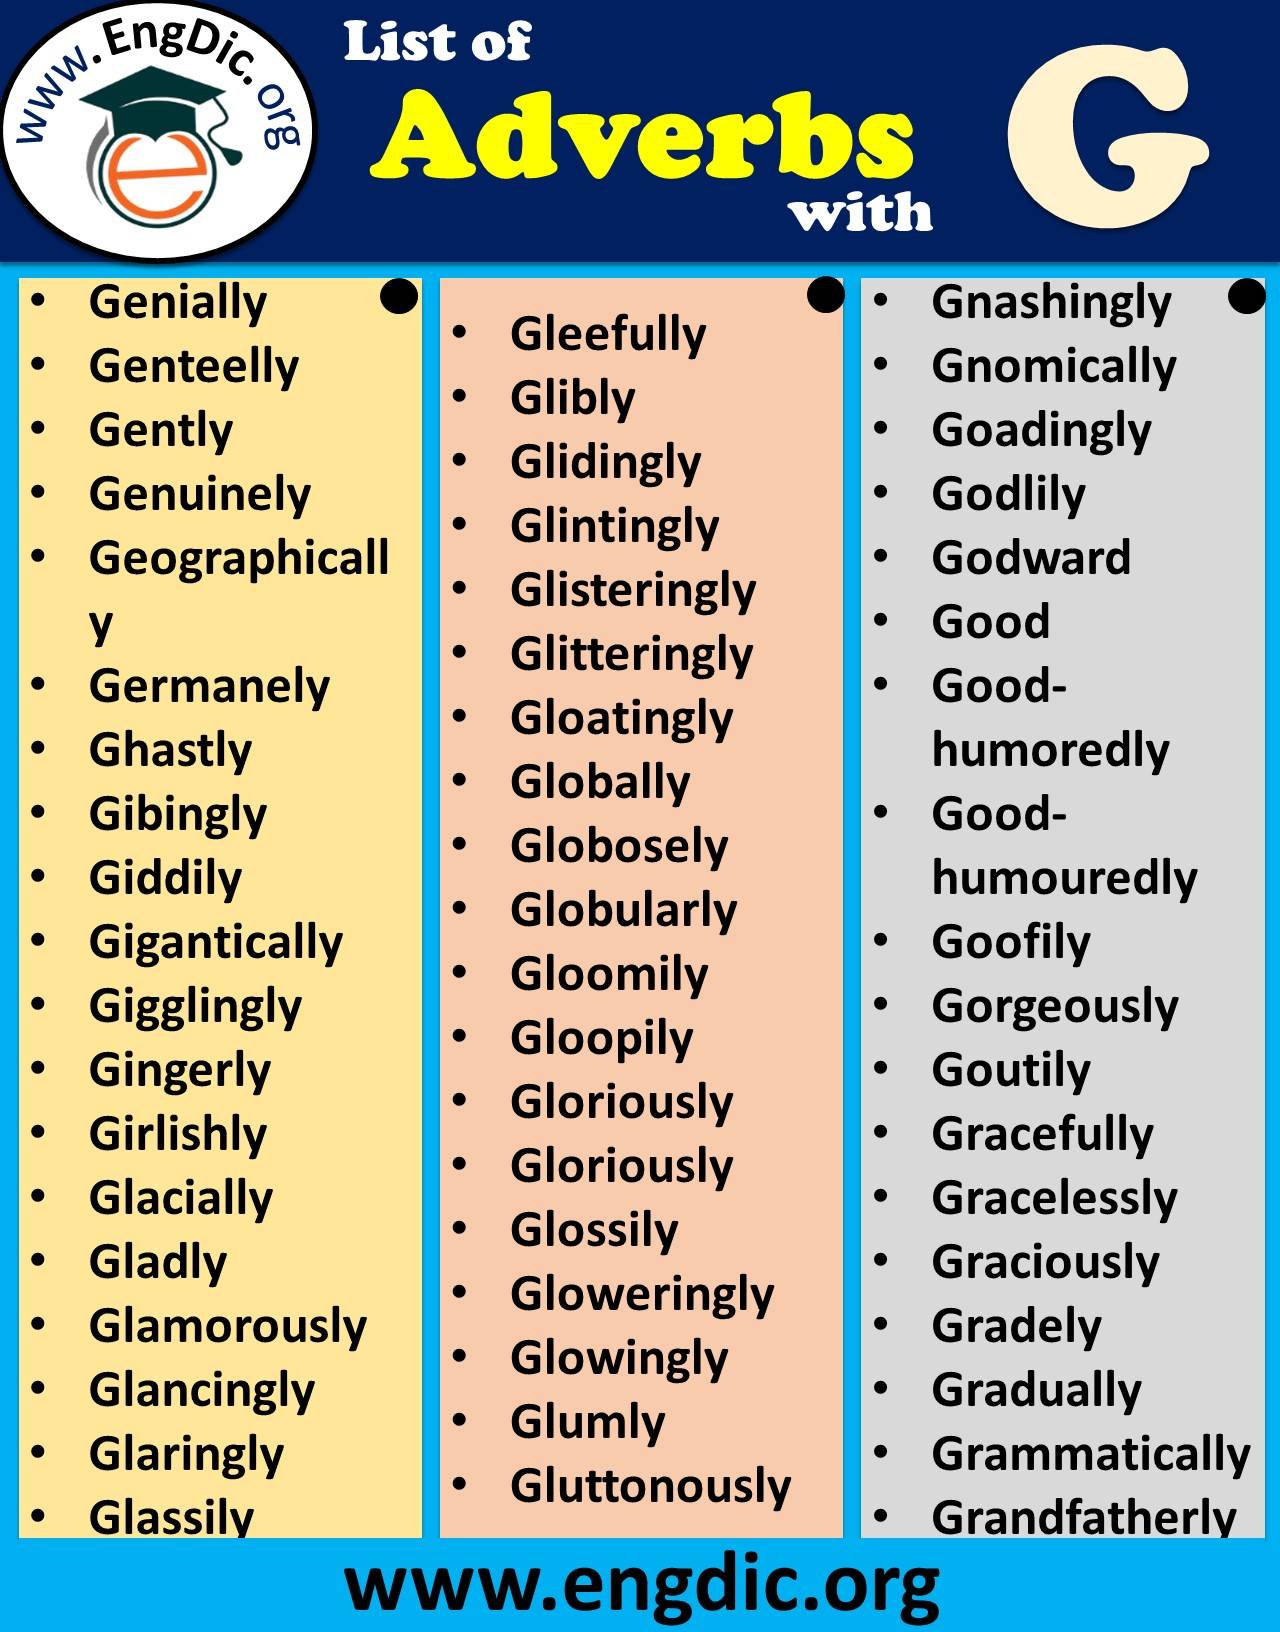 adverbs starting with g